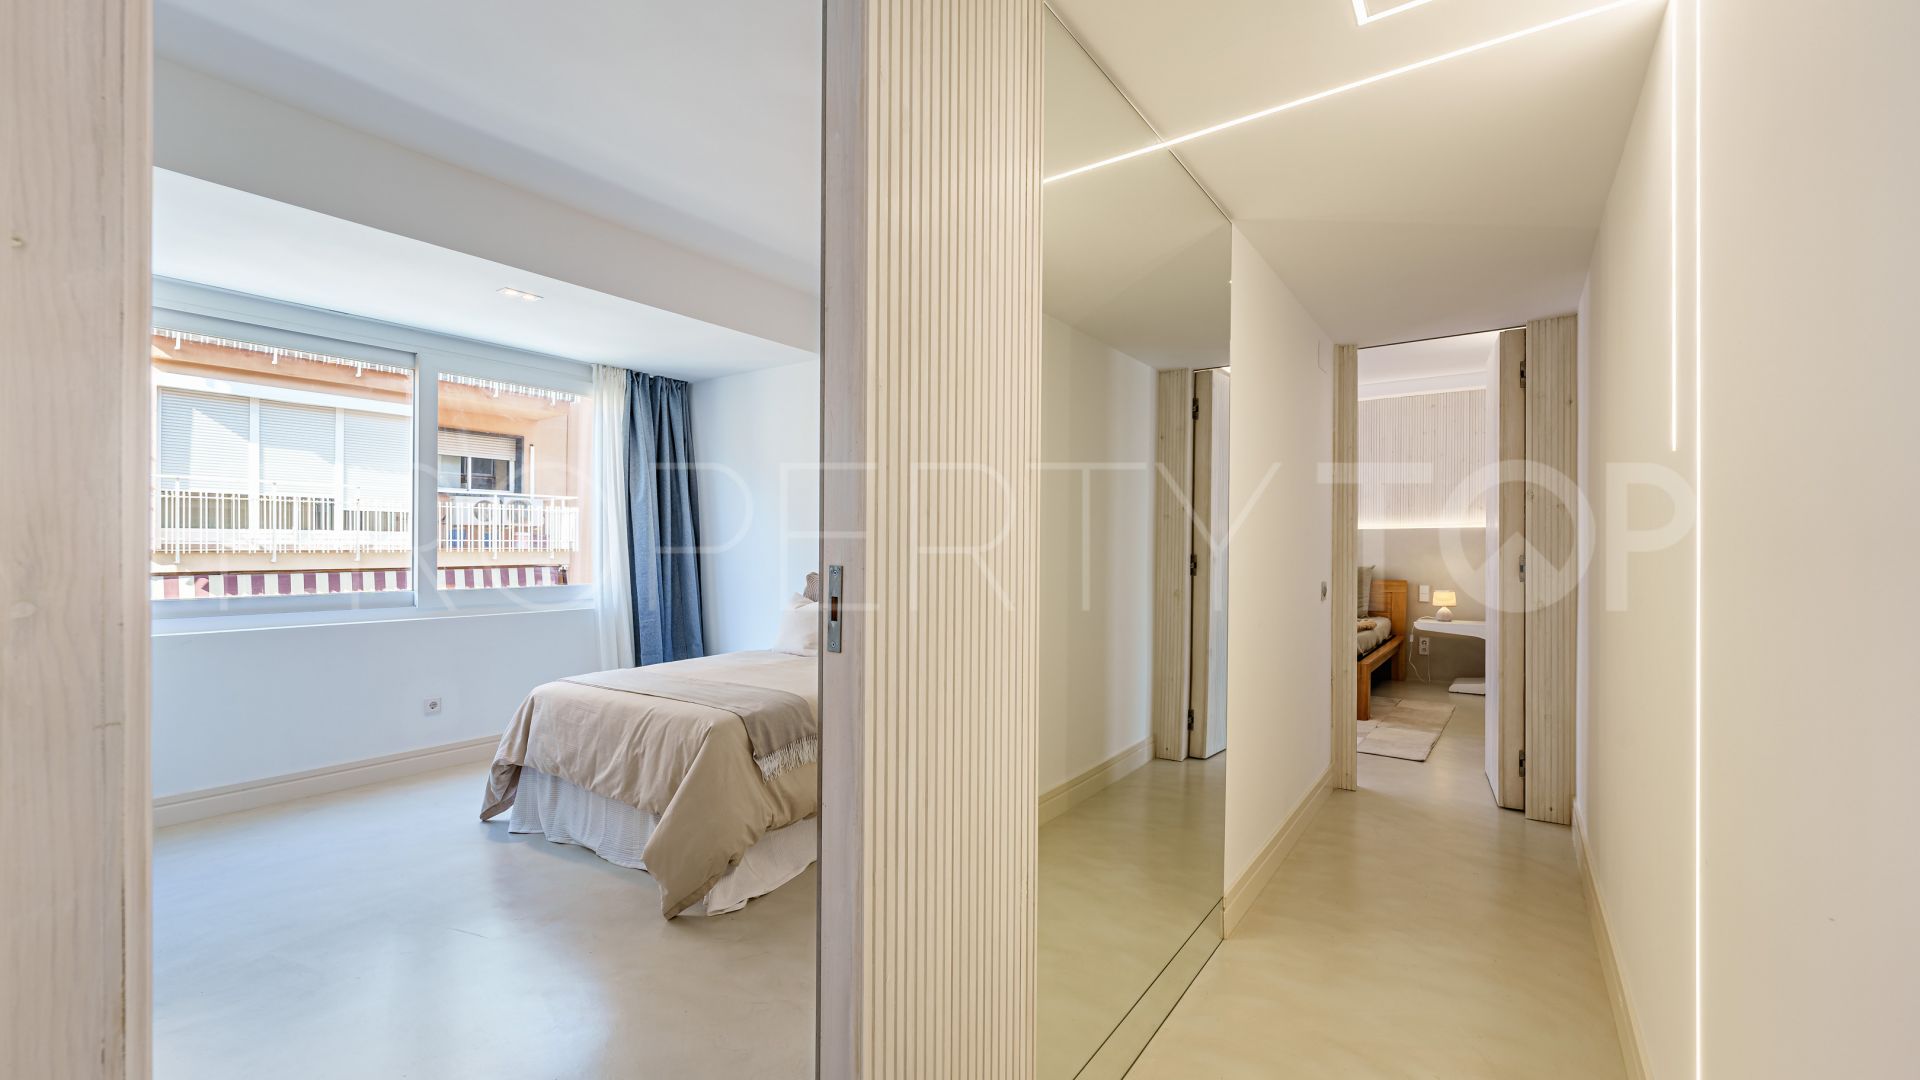 For sale Malaga apartment with 3 bedrooms